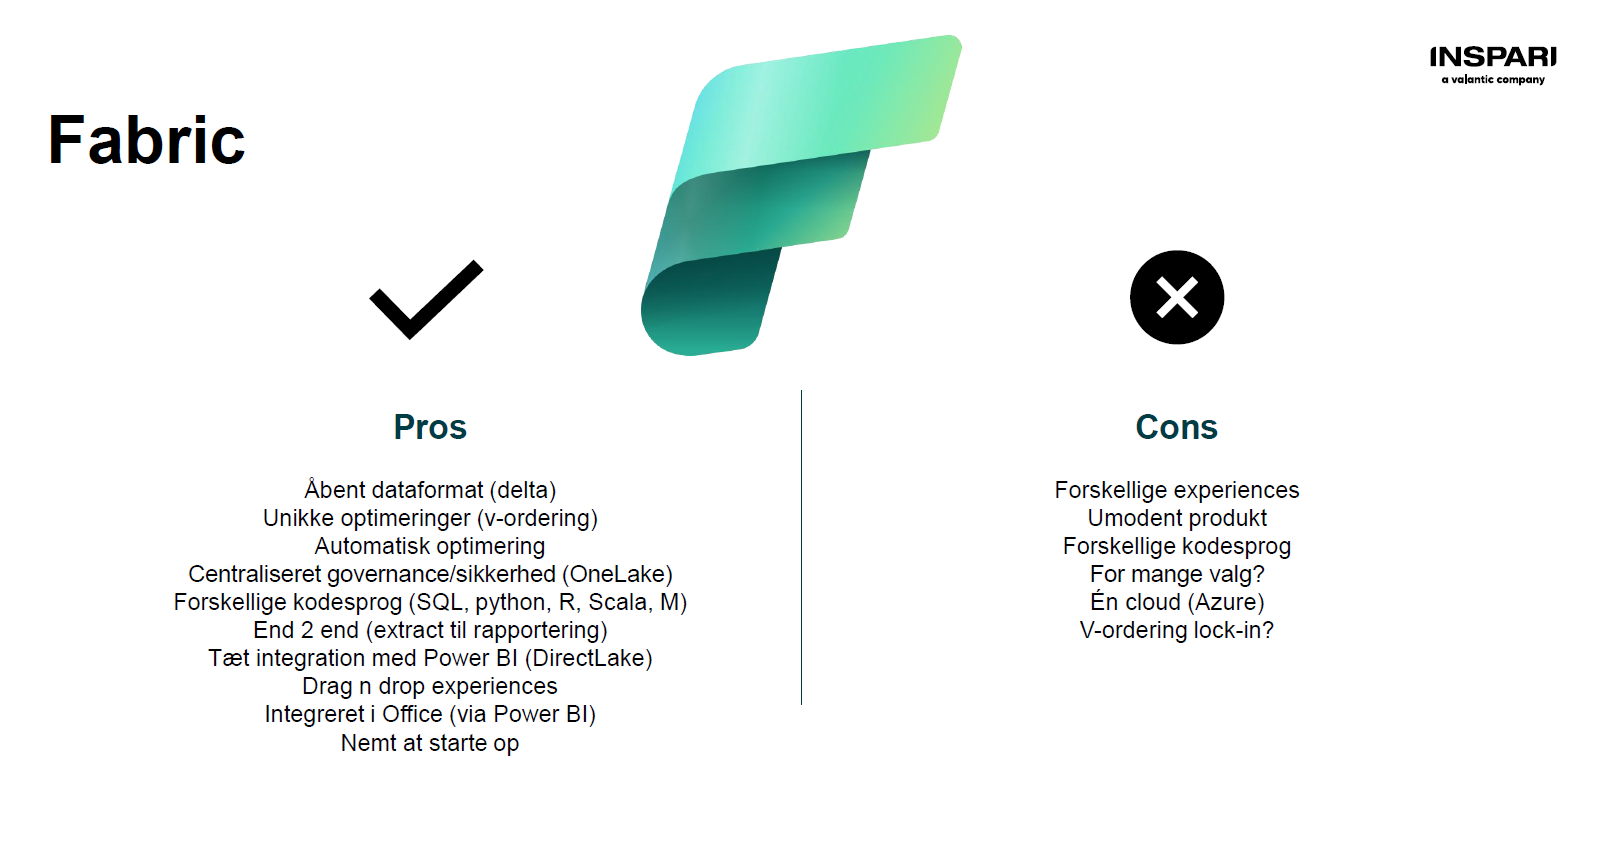 Pros and cons ved Microsoft Fabric_Inspari